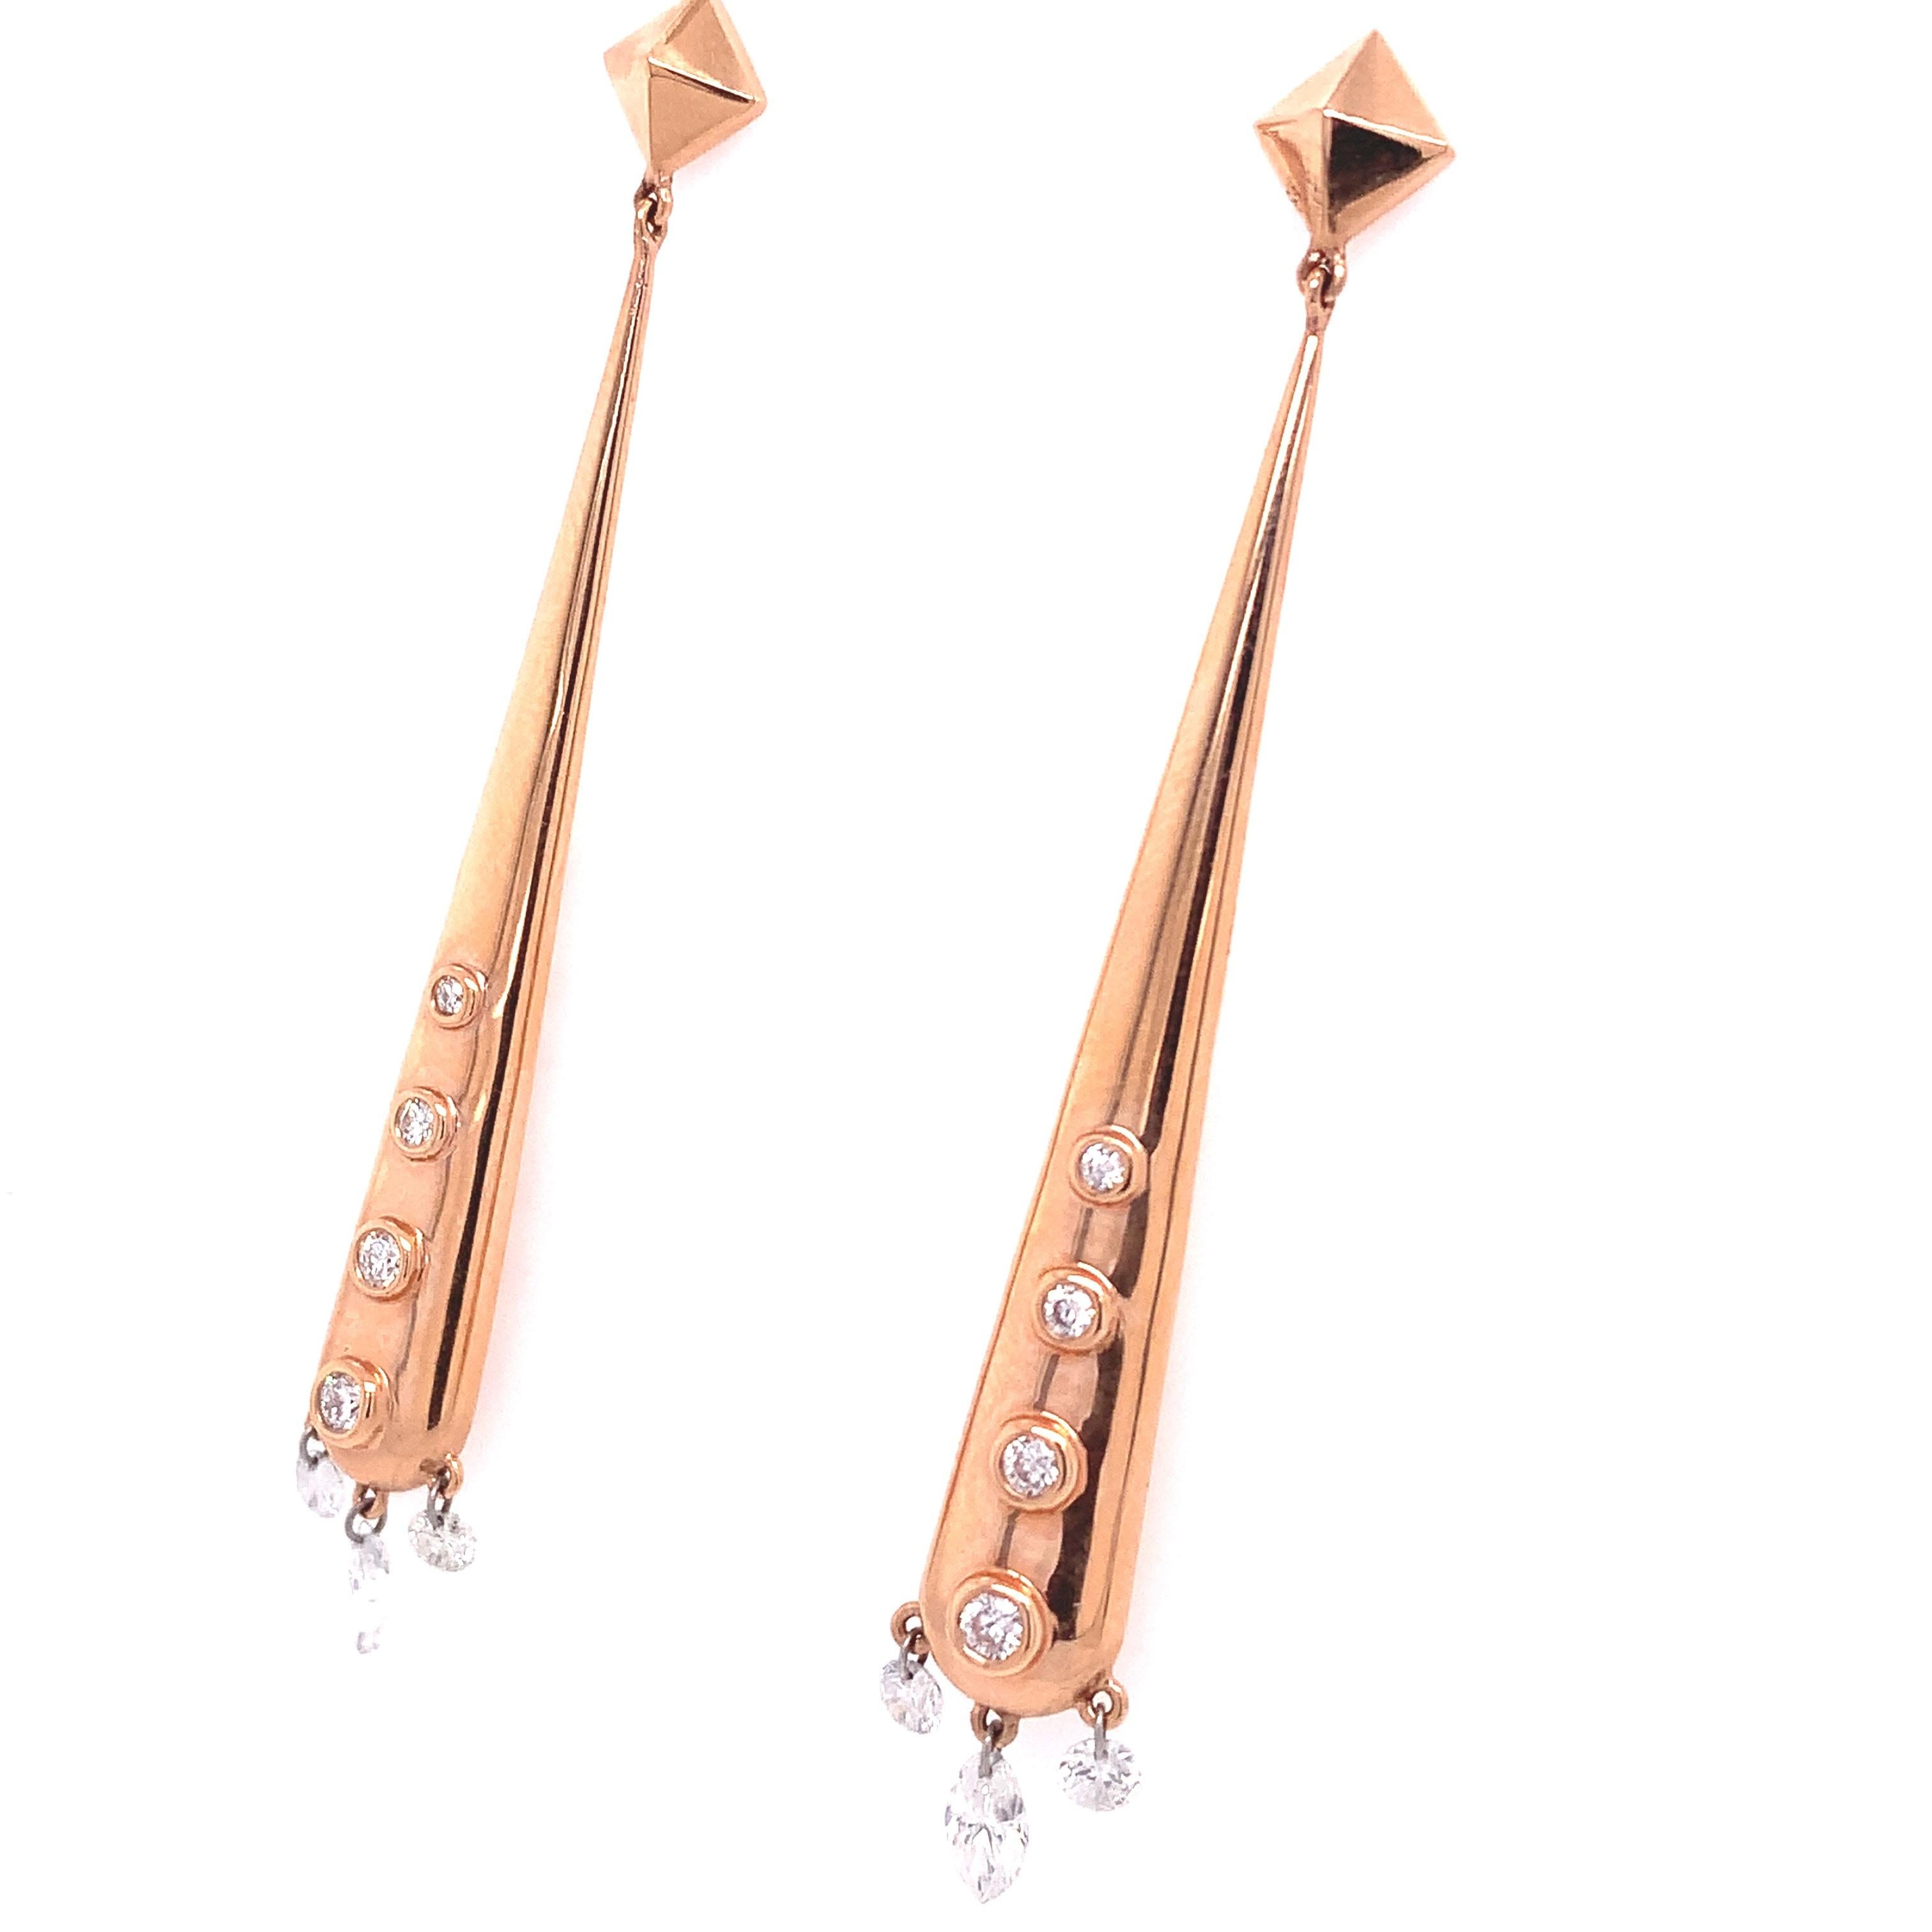 Dainty Collection

Rose Gold earrings sculpted to capture the alluring shape of the pyramid unleash the incomparable beauty 0.81 carat diamond stones 
